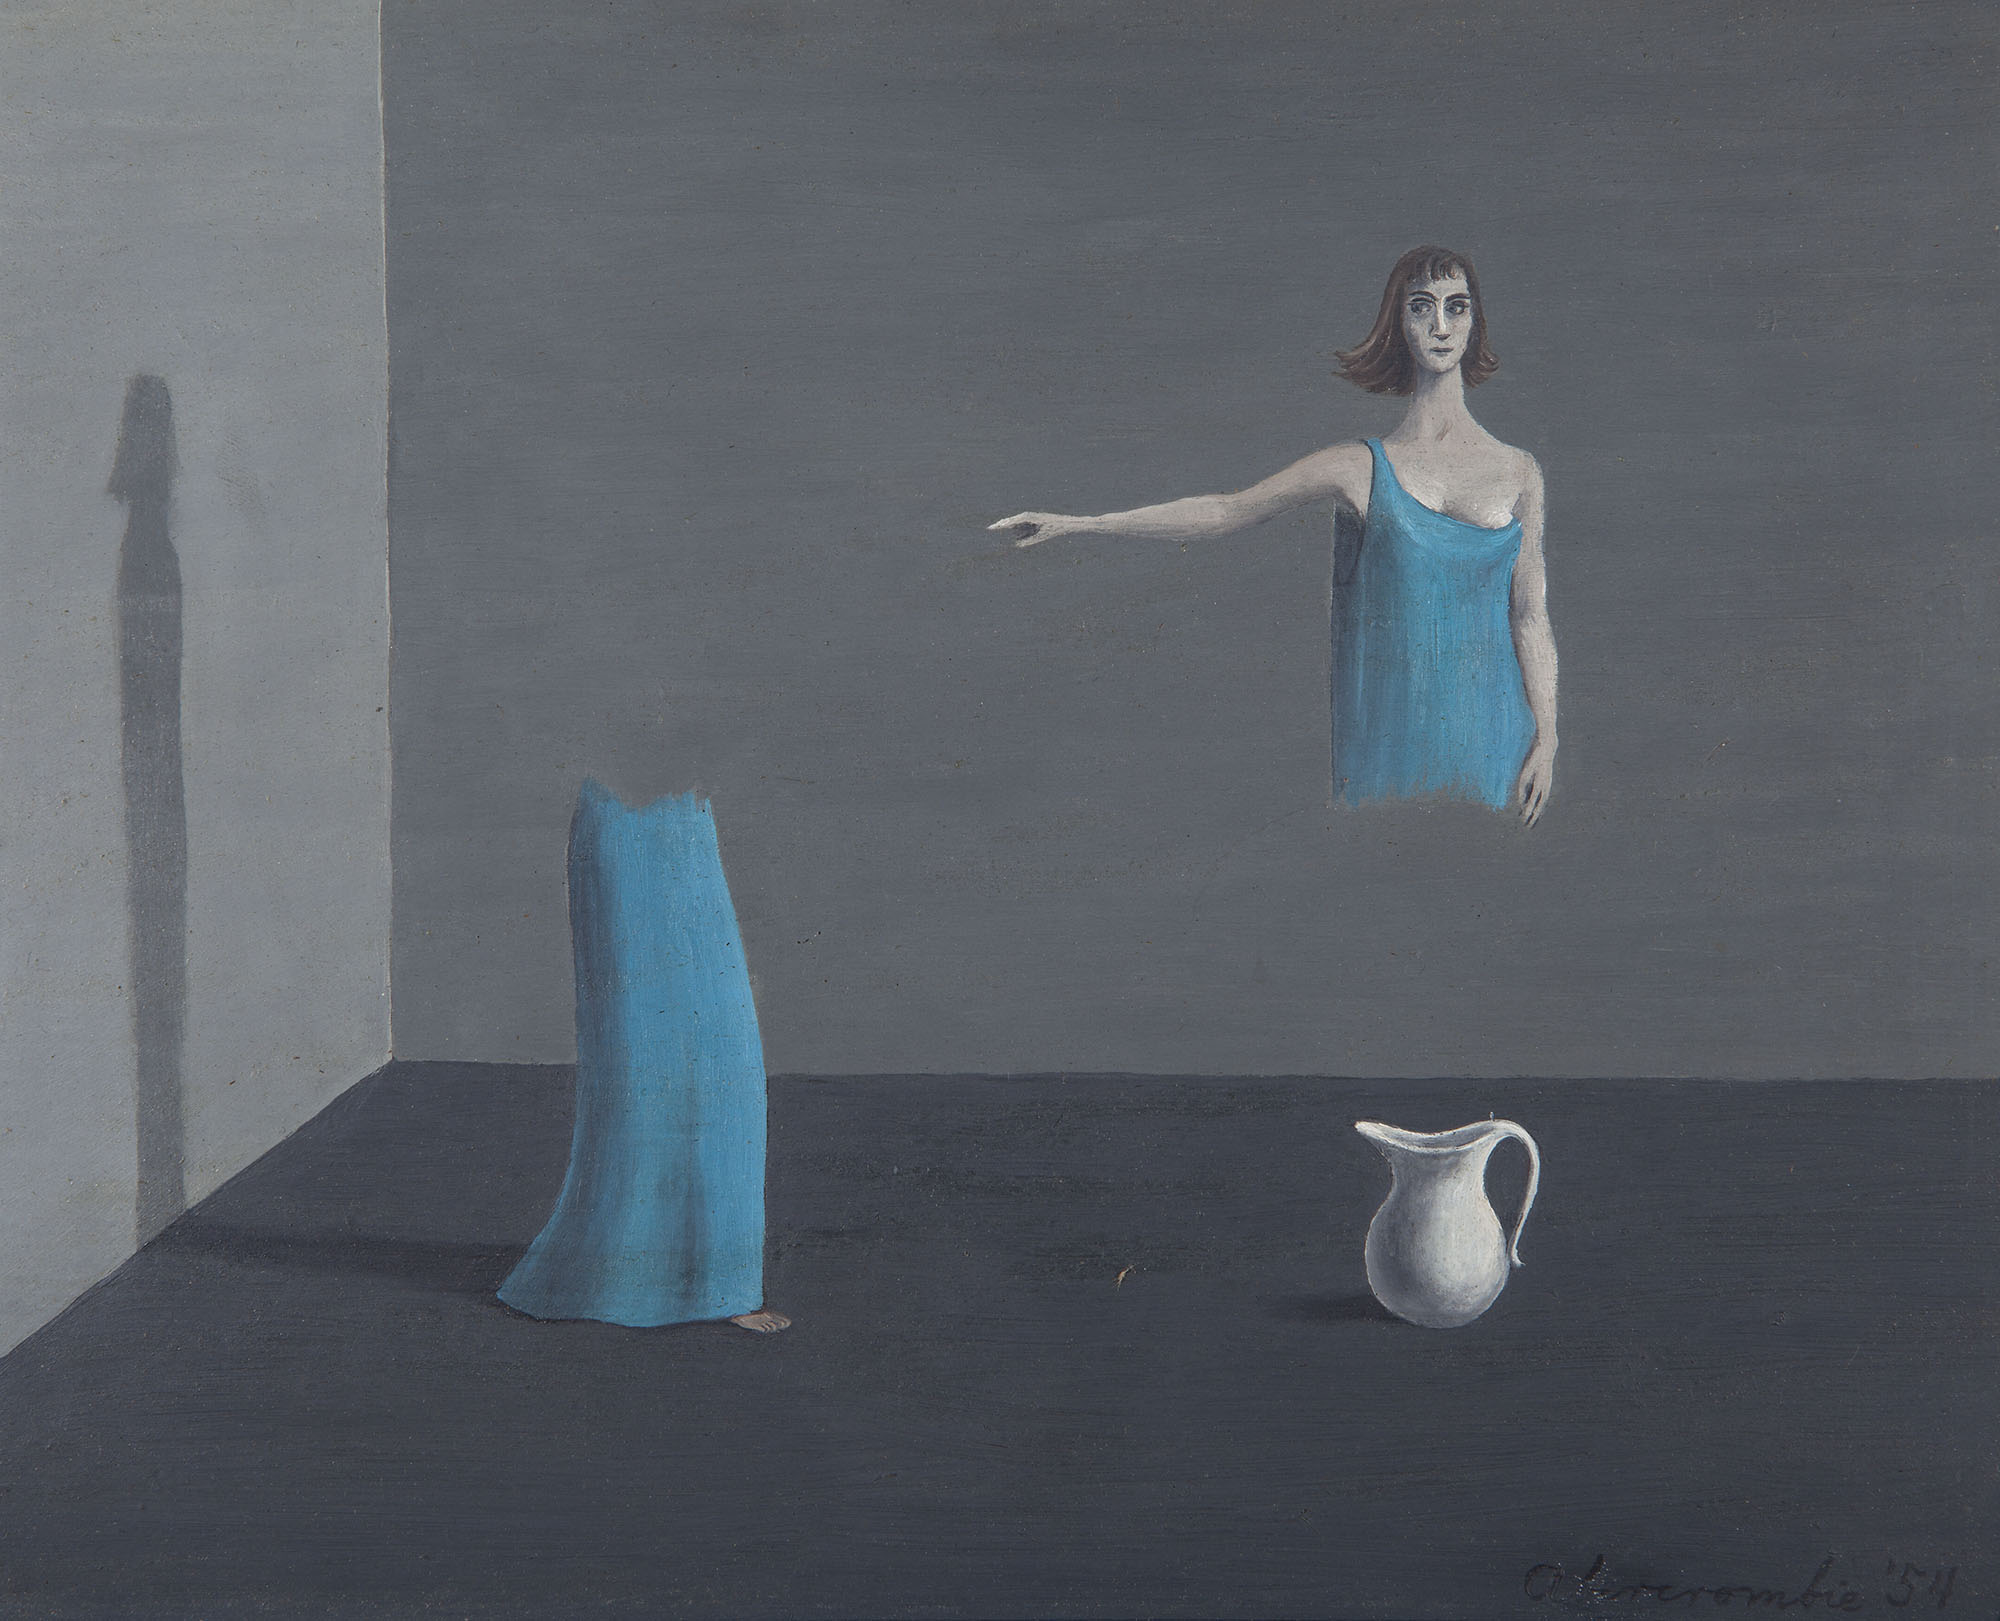 Gertrude Abercrombie, Split Personality, 1954. Oil on pressed board. Collection of DePaul Art Museum, Art Acquisition Endowment, 2010.21